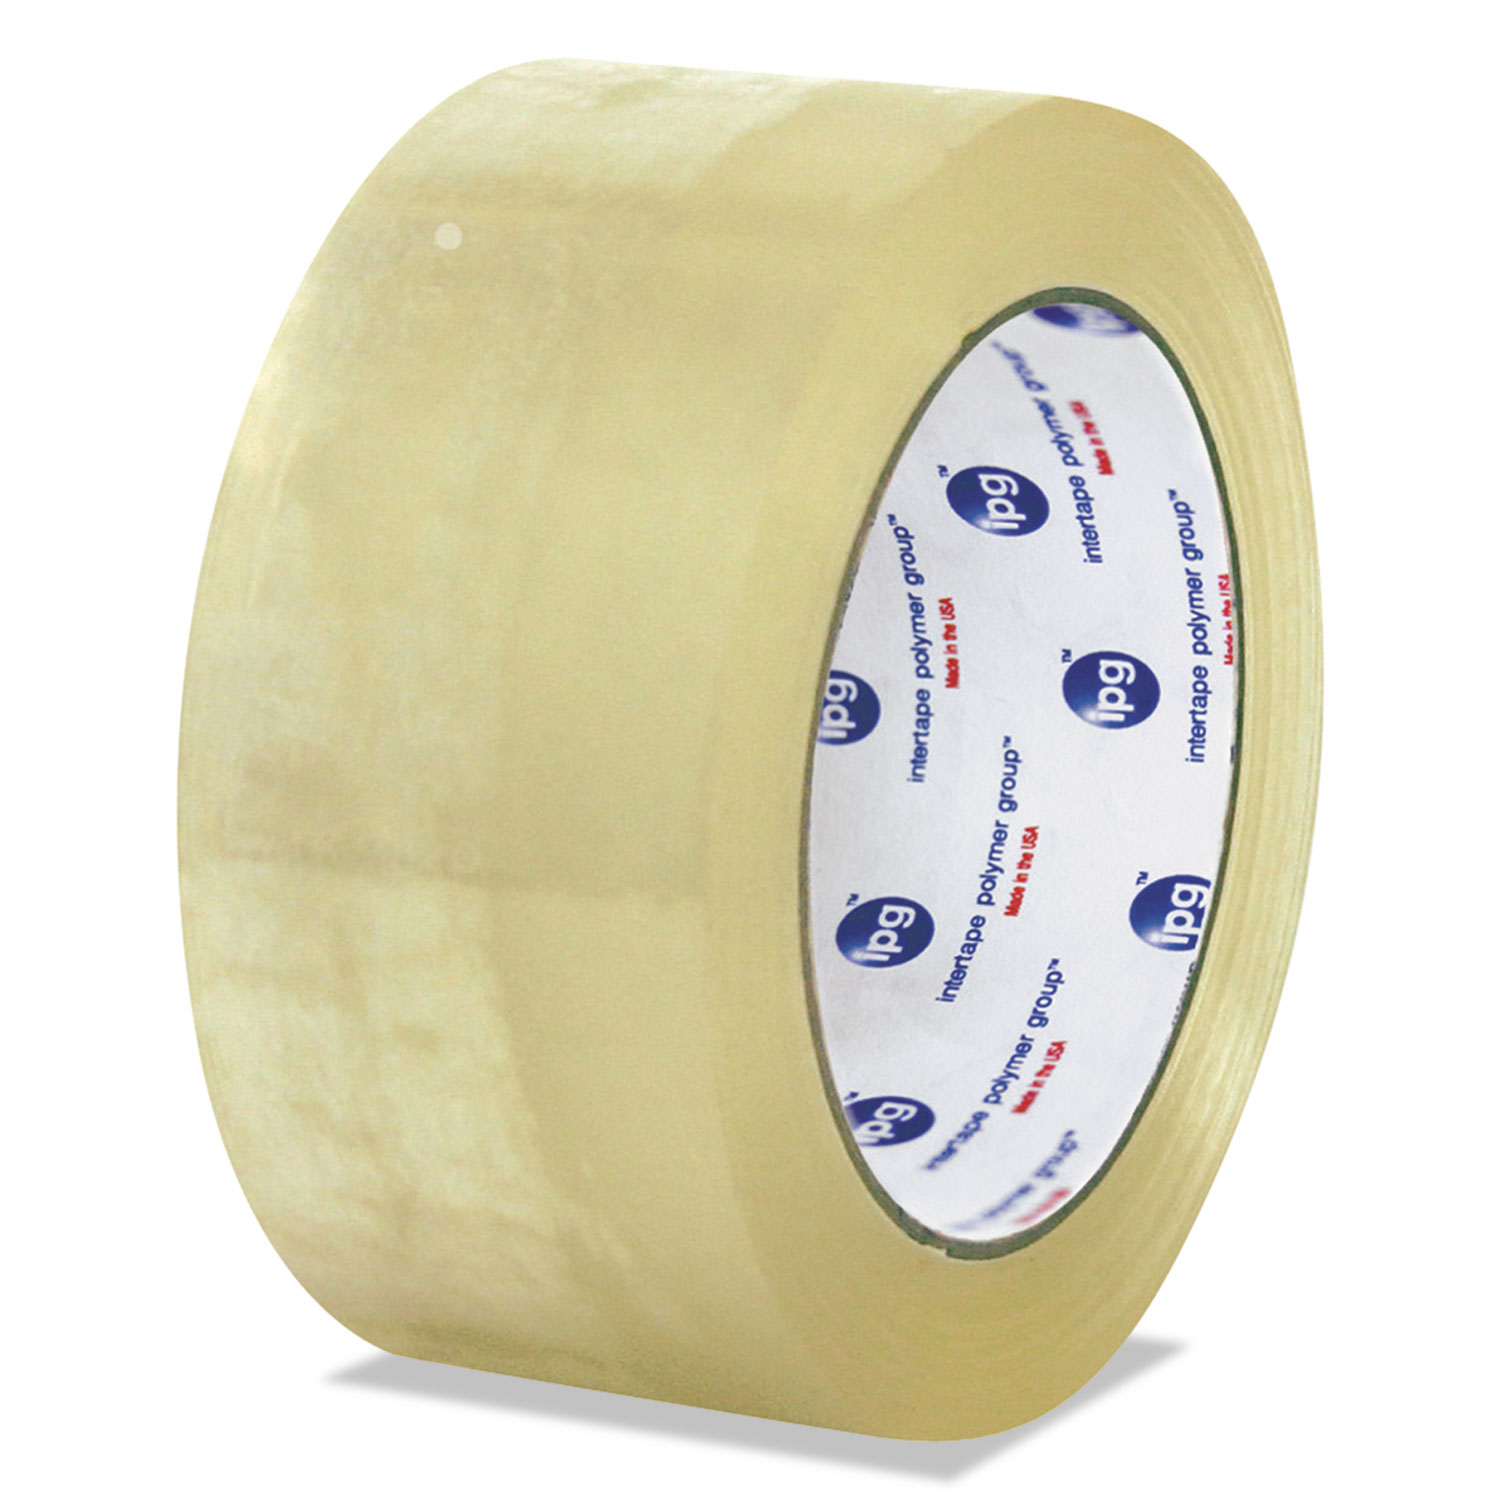  Universal UFS934419 Clear Packaging Tape, 3 Core, 72 mm x 100 m, Clear, 24/Carton (UNV934419) 